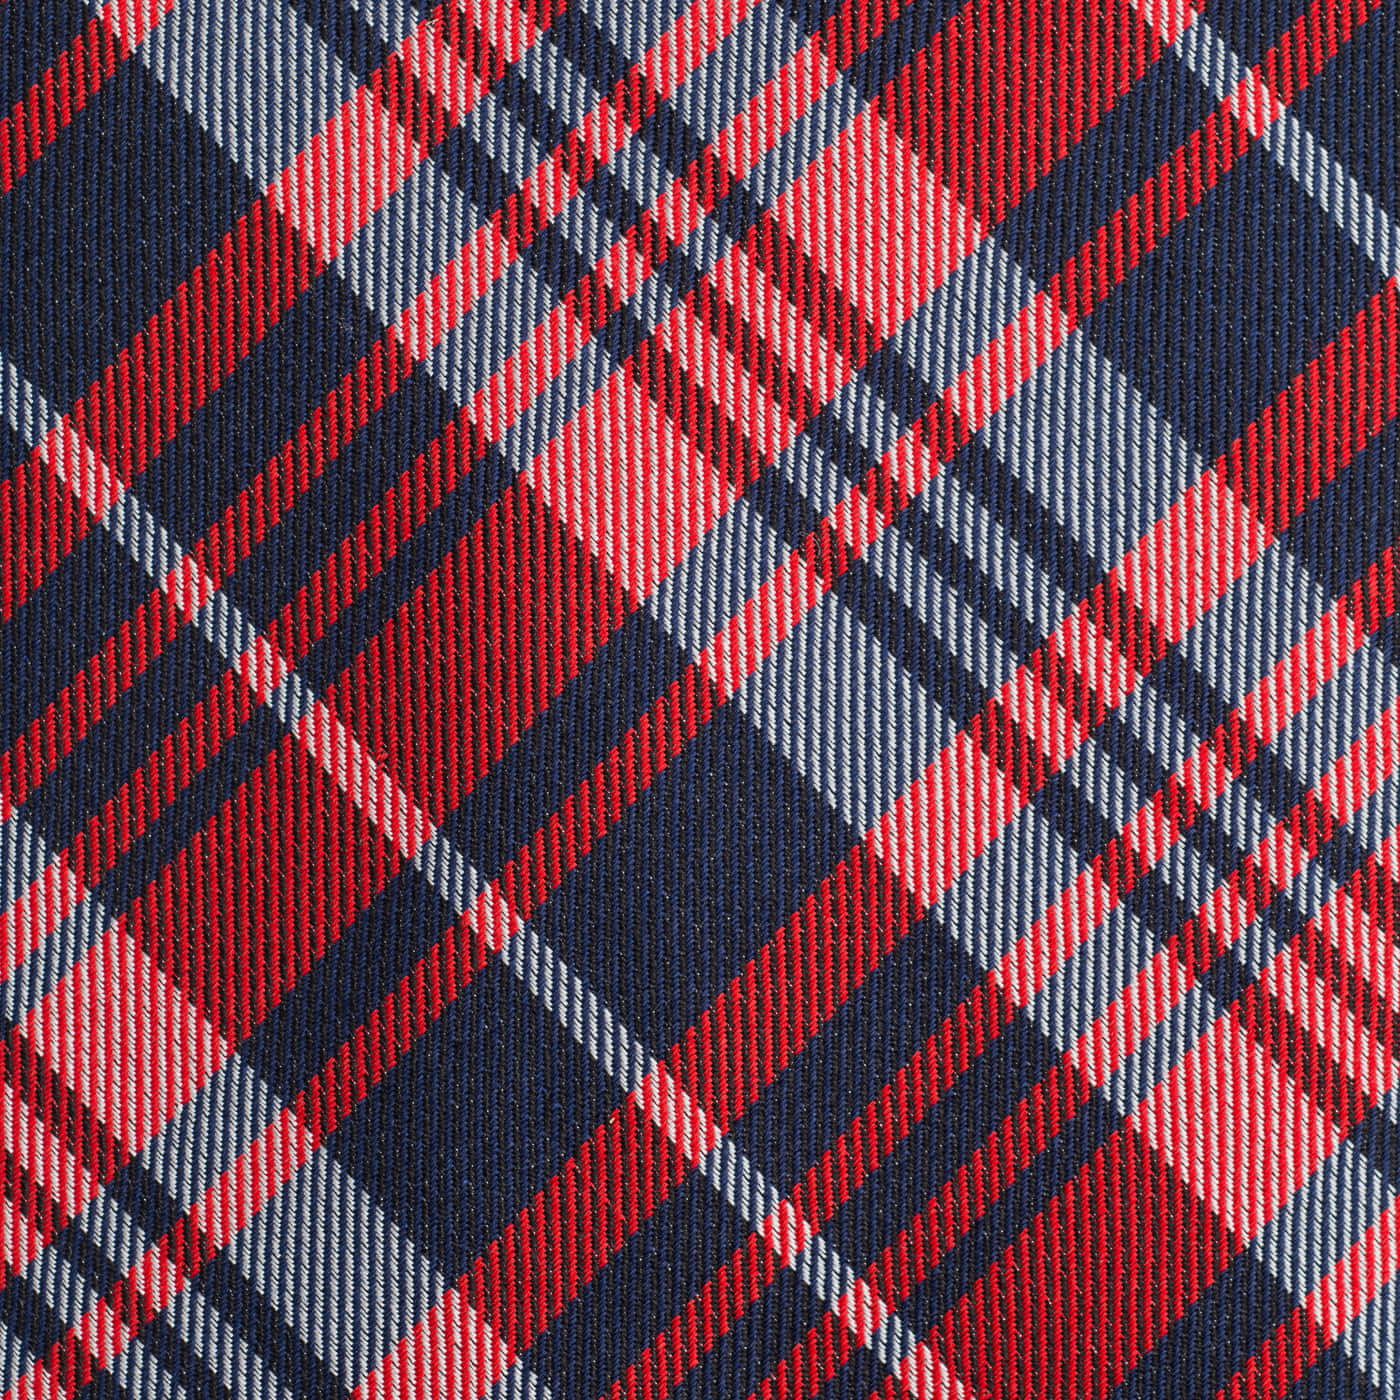 Classic Red and Black Flannel Texture Background